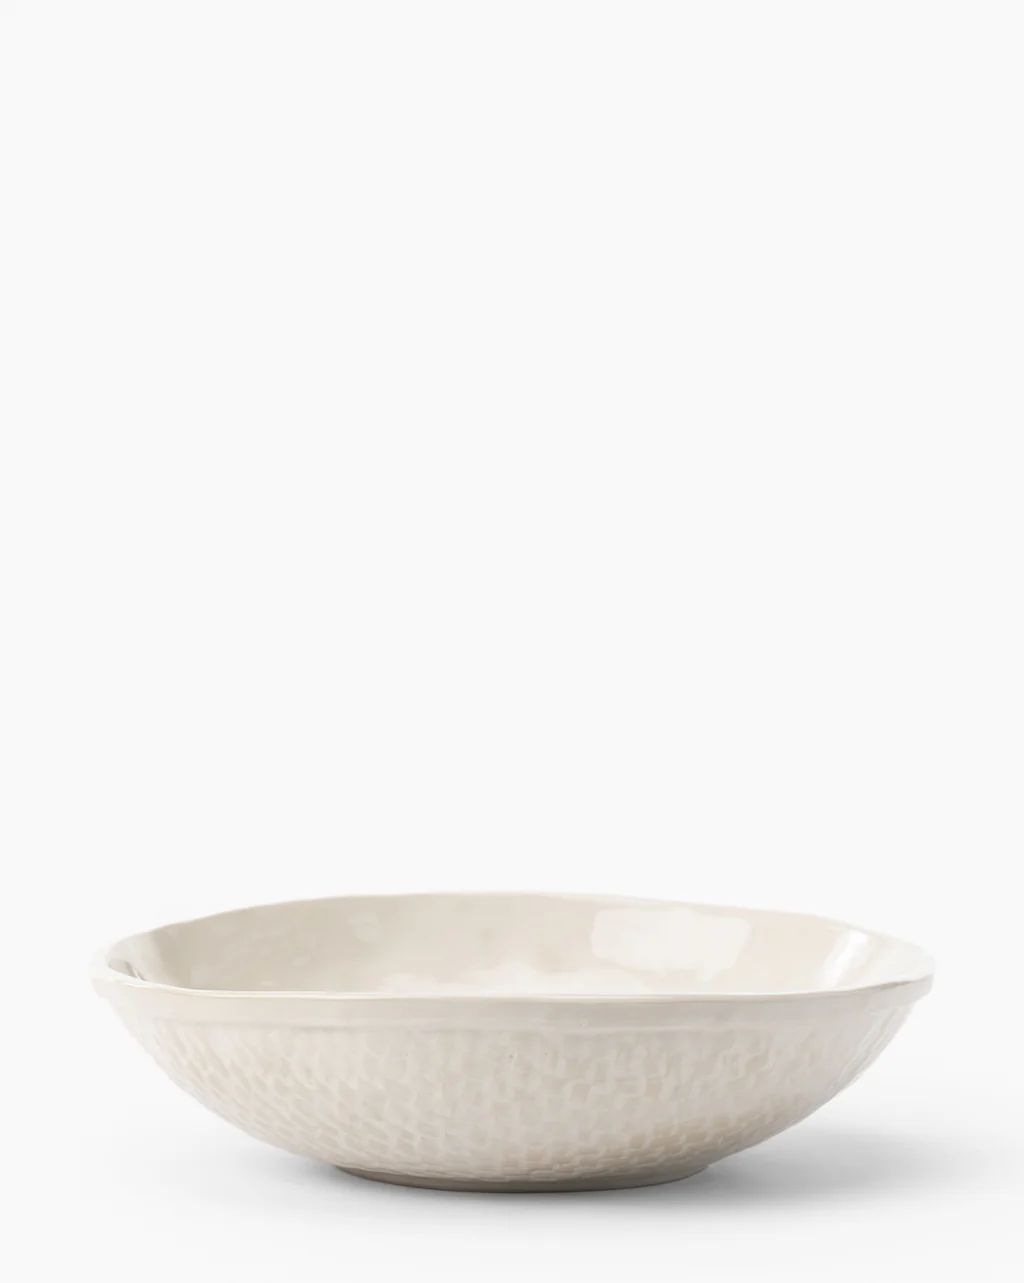 Dion Serving Bowl | McGee & Co.